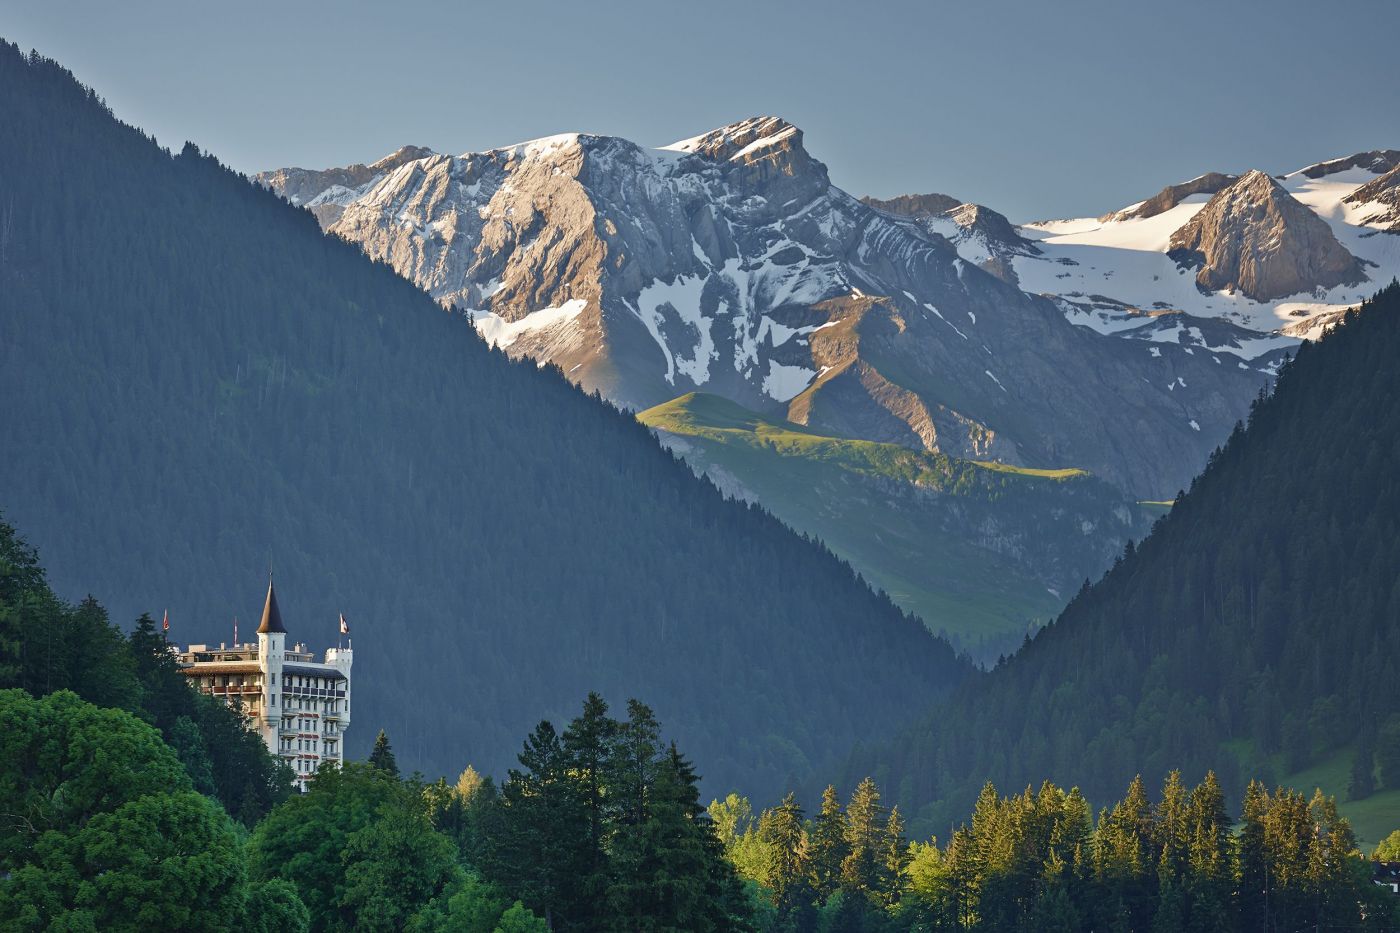 View of the hotel and the mountains at luxury wedding resort in Gstaad